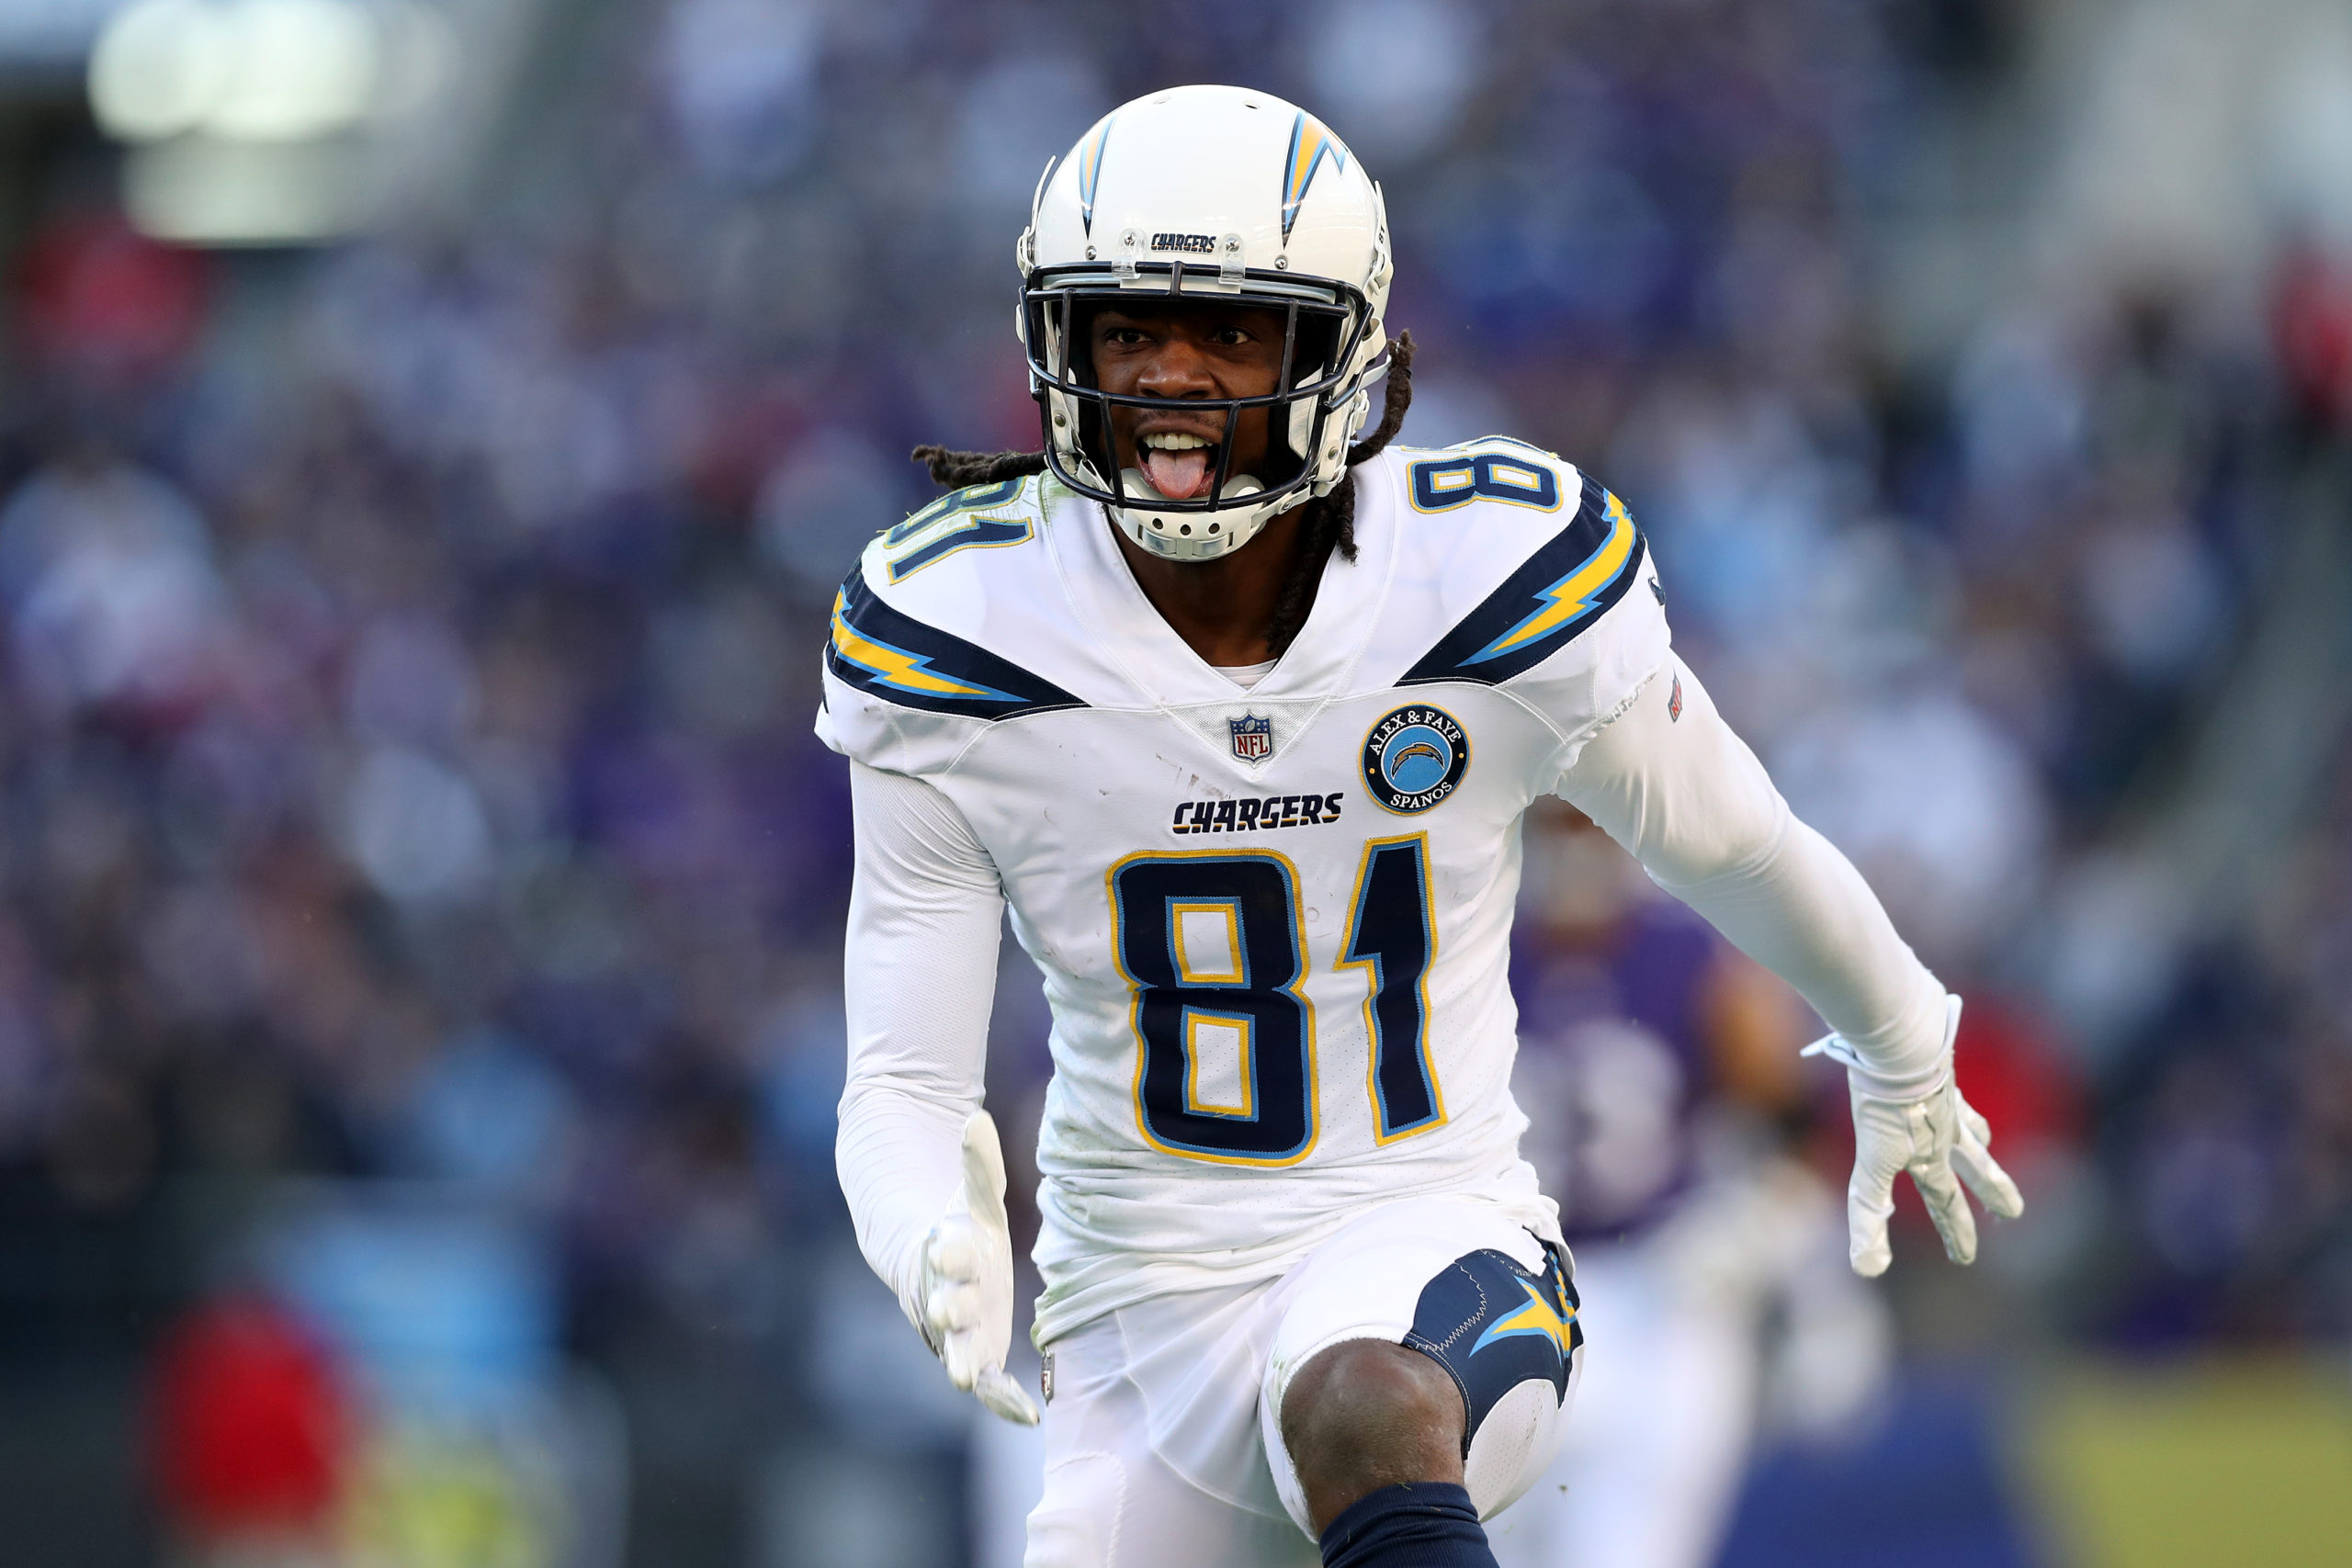 BALTIMORE, MARYLAND - JANUARY 06: Mike Williams #81 of the Los Angeles Chargers celebrates a catch against the Baltimore Ravens during the second half in the AFC Wild Card Playoff game at M&T Bank Stadium on January 06, 2019 in Baltimore, Maryland. Rob Carr/Getty Images